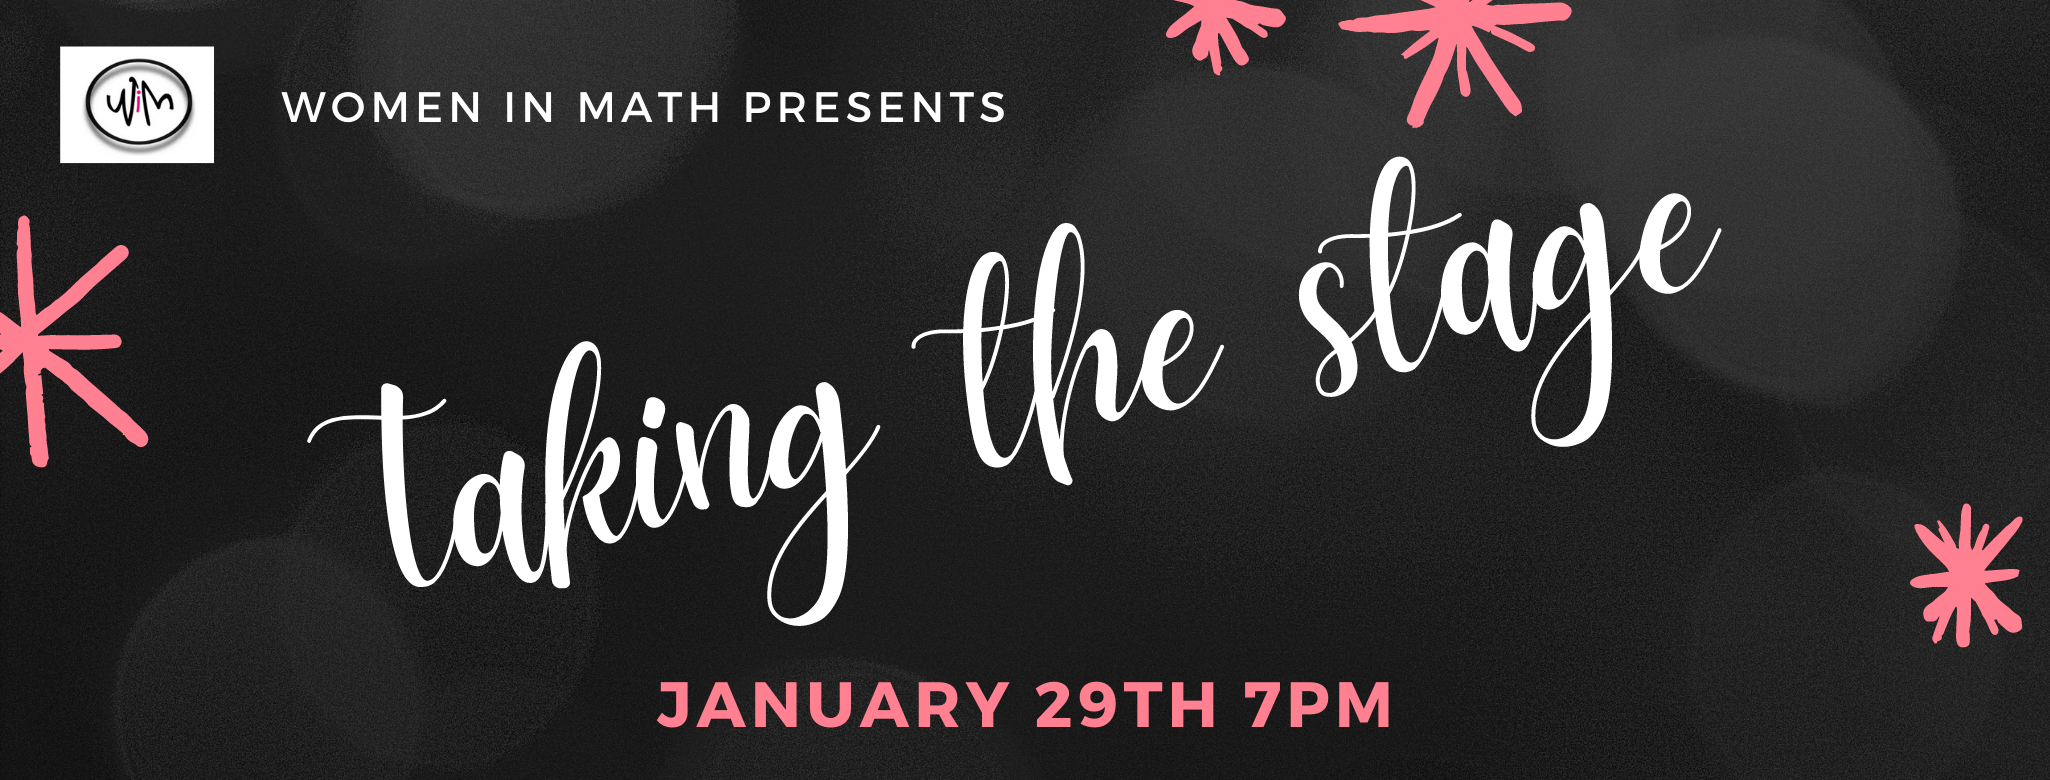 Women in Math Presents: Taking the Stage -- January 29th 7pm